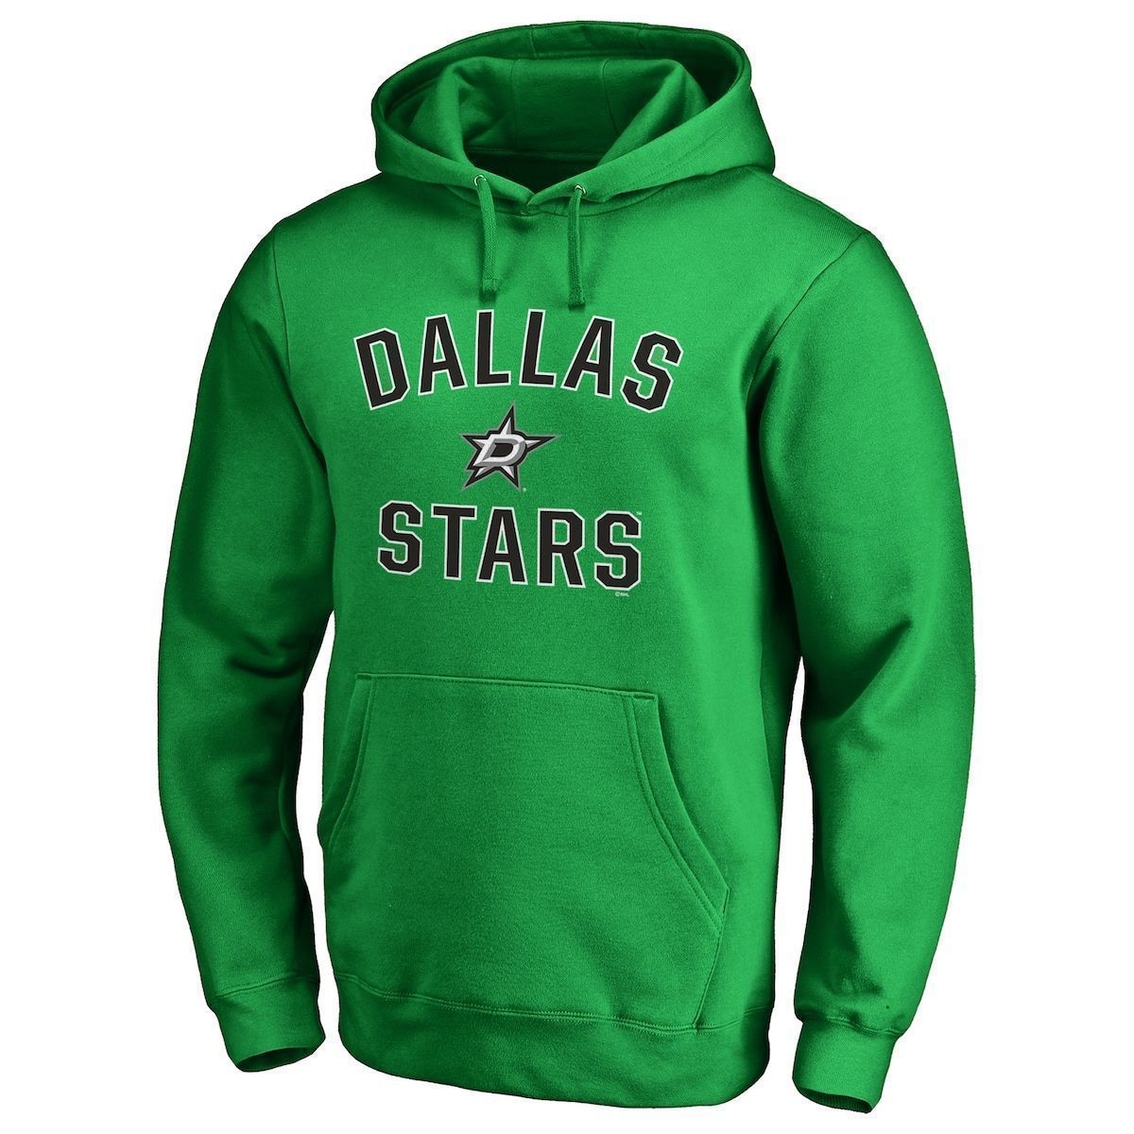 Fanatics Branded Men's Kelly Green Dallas Stars Team Victory Arch Fitted Pullover Hoodie - Image 3 of 4